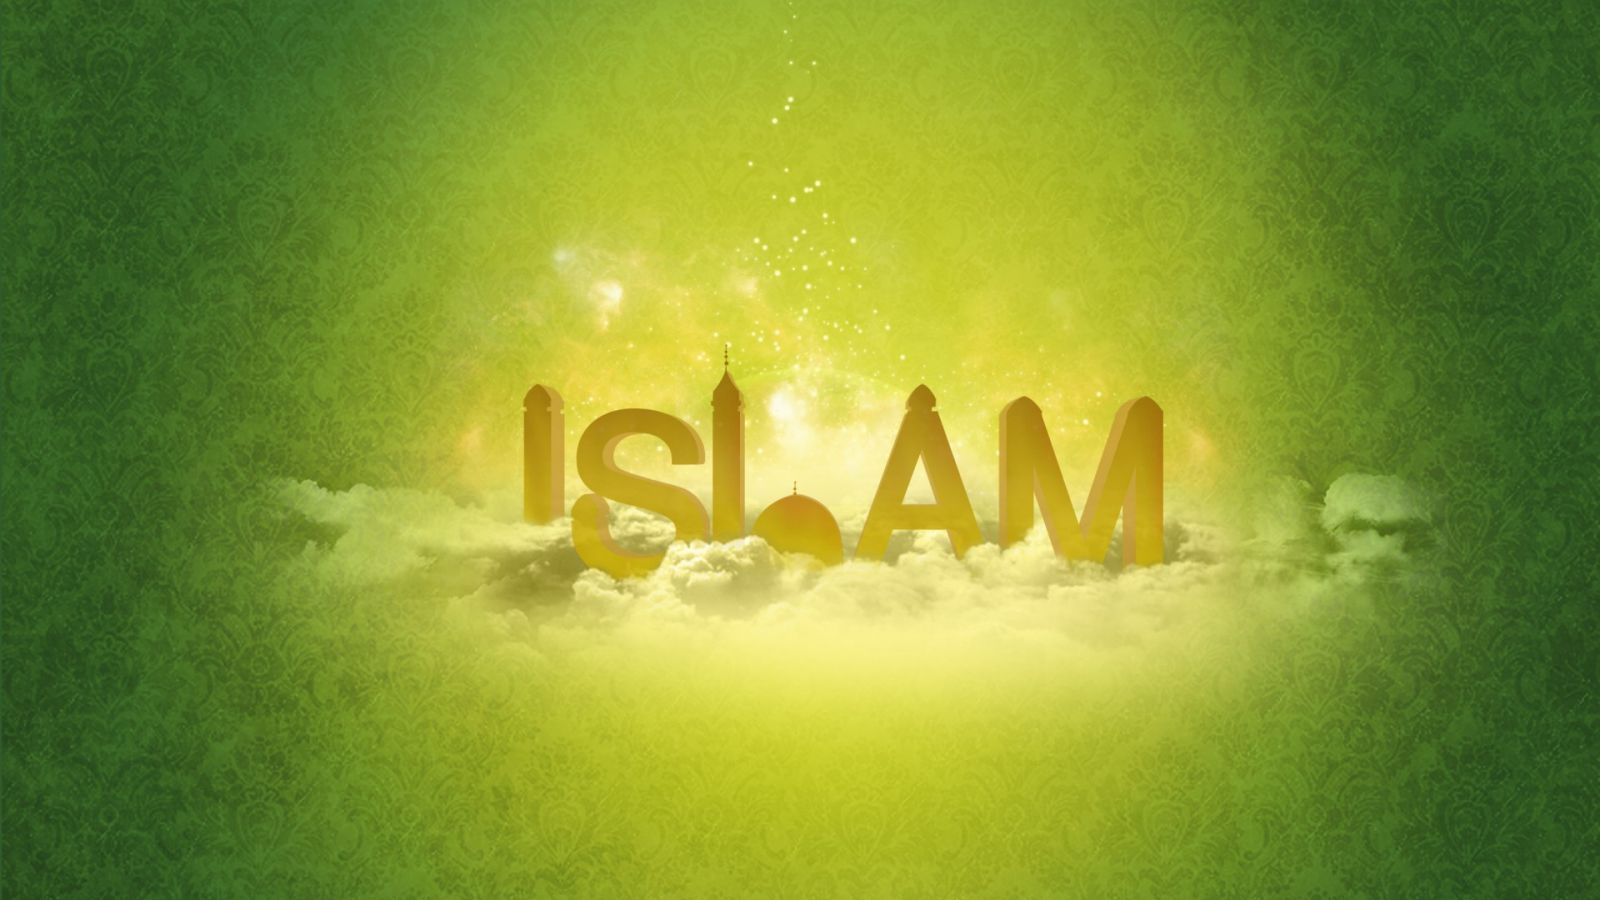 Islamic Hd Wallpaper Free Download For Mobile